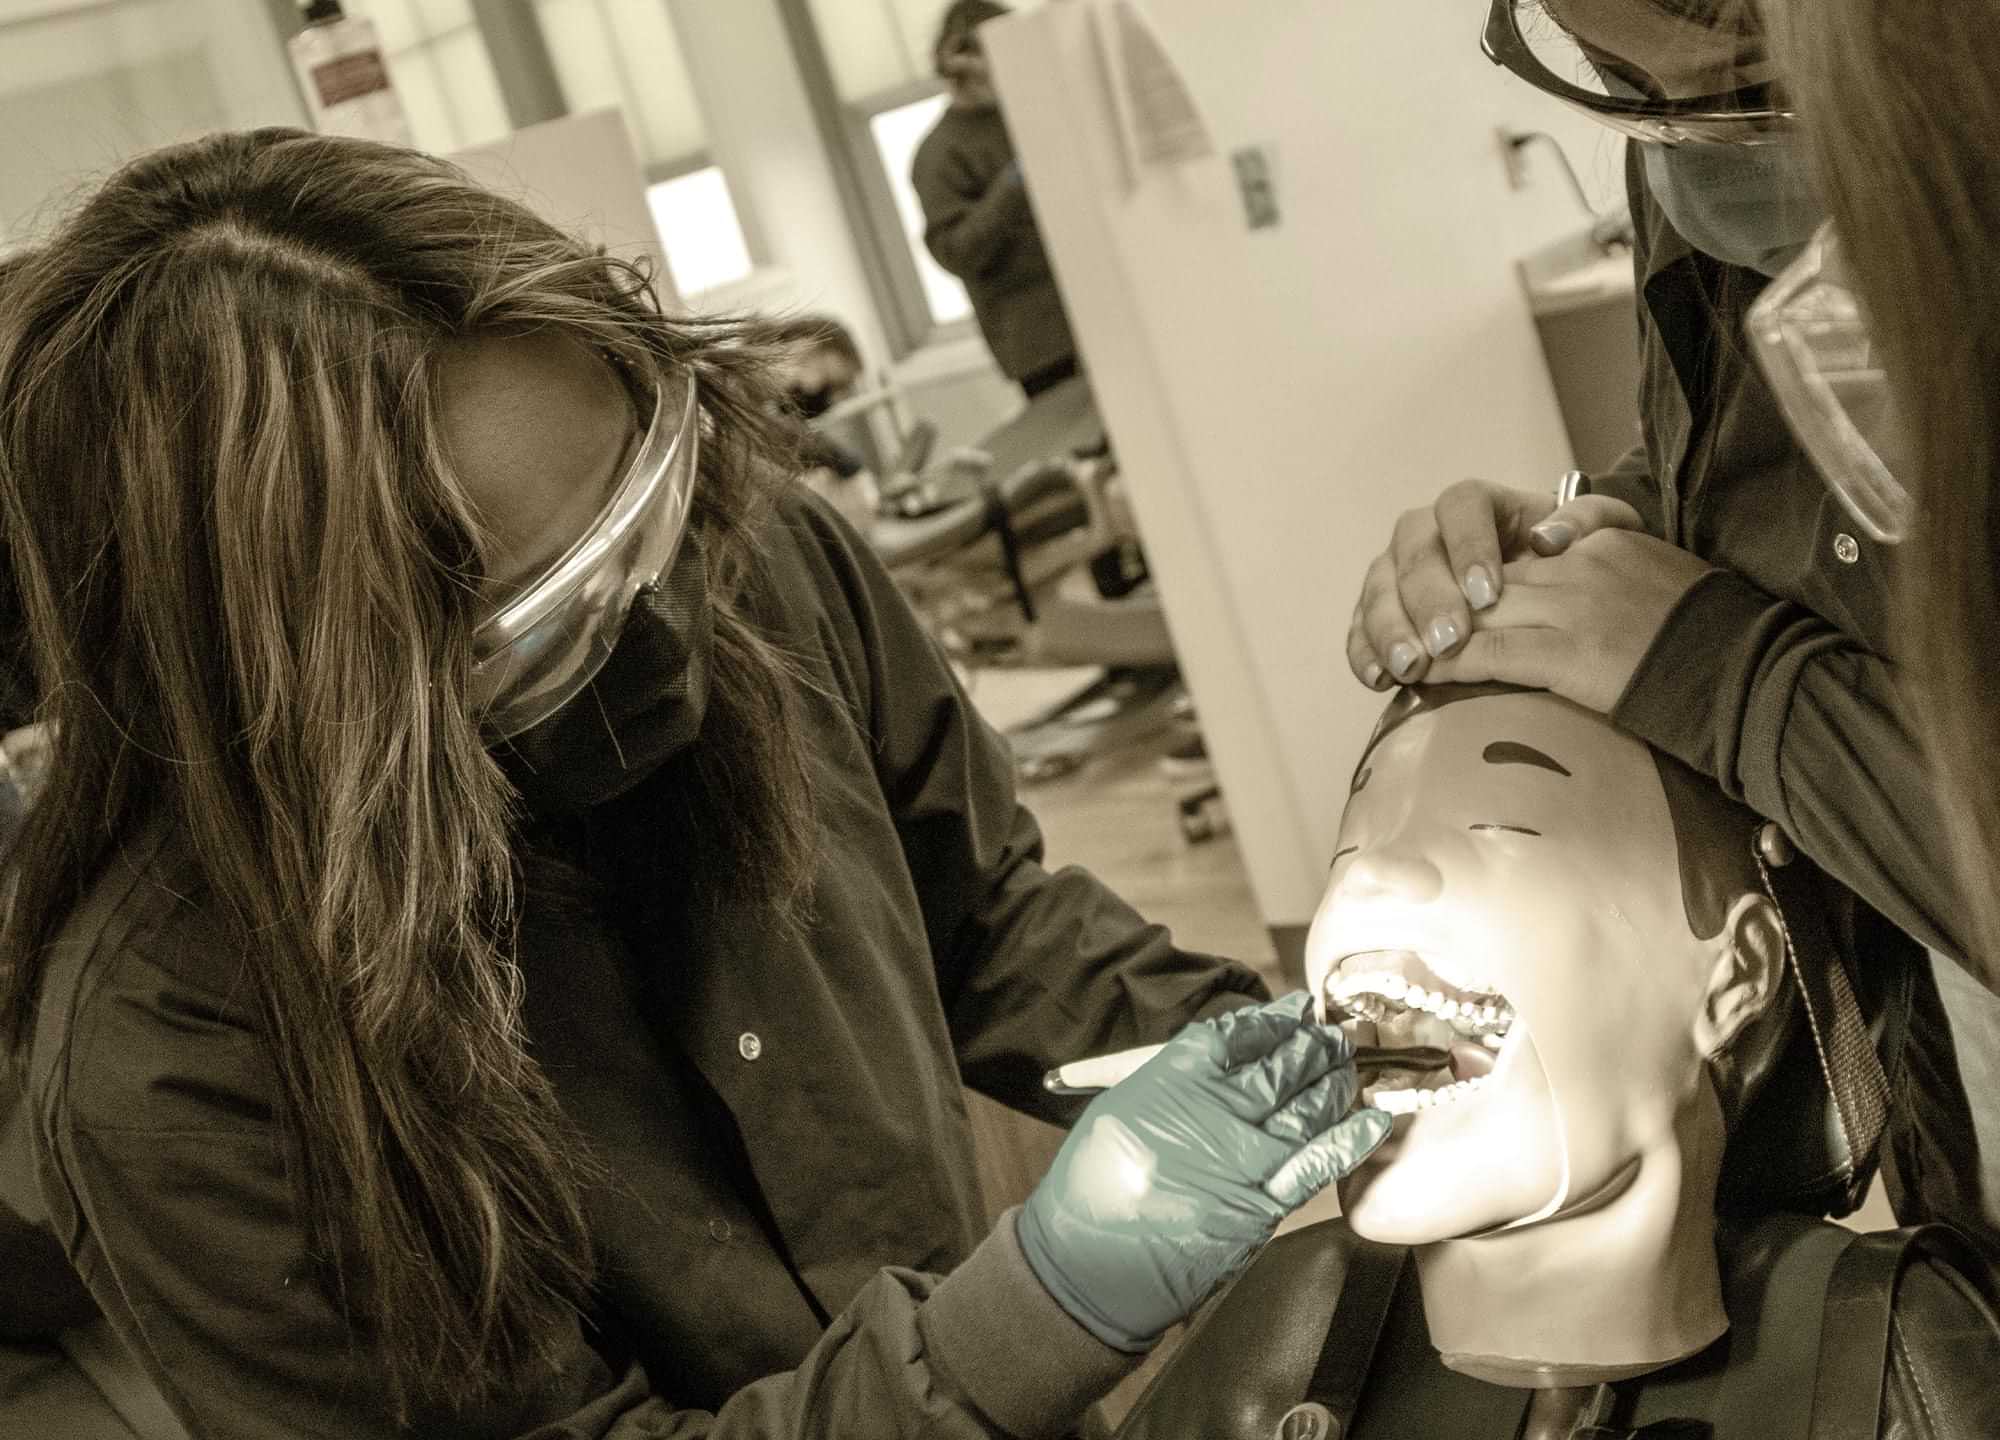 students wearing masks and goggles perform mock dental work on a realistic dental mannequin head